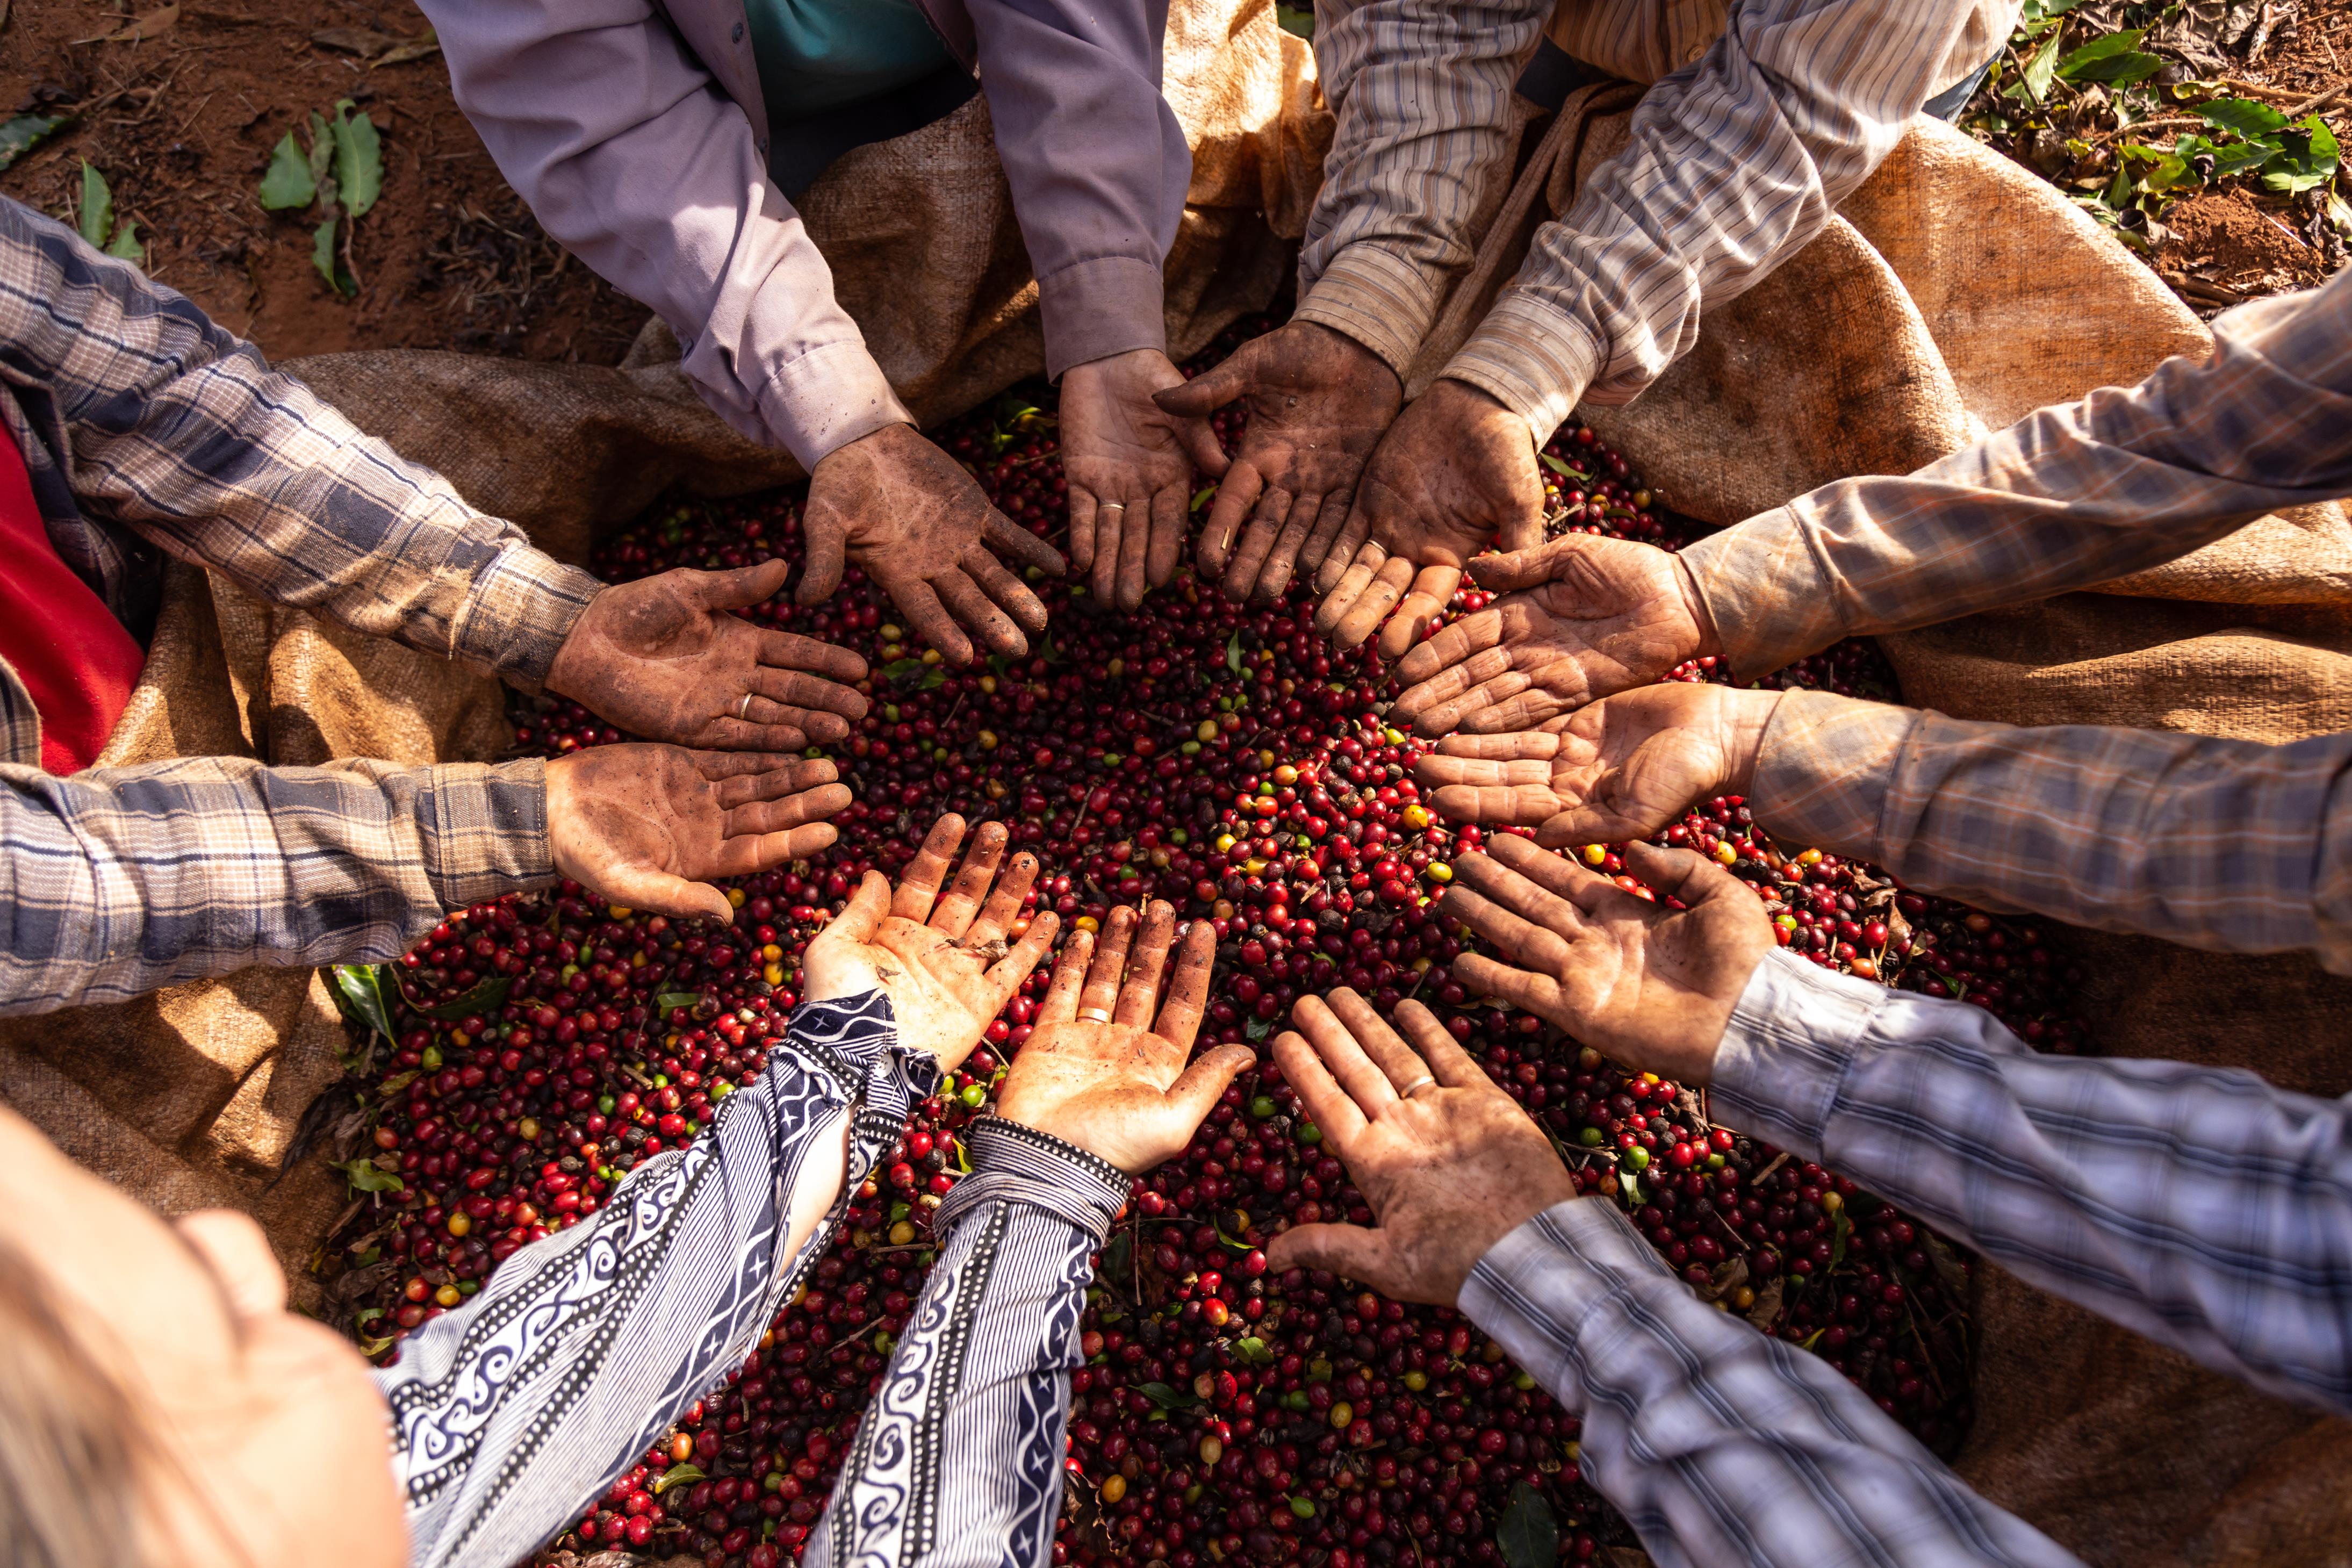 Group of coffee farmers showing their hands above coffee beans